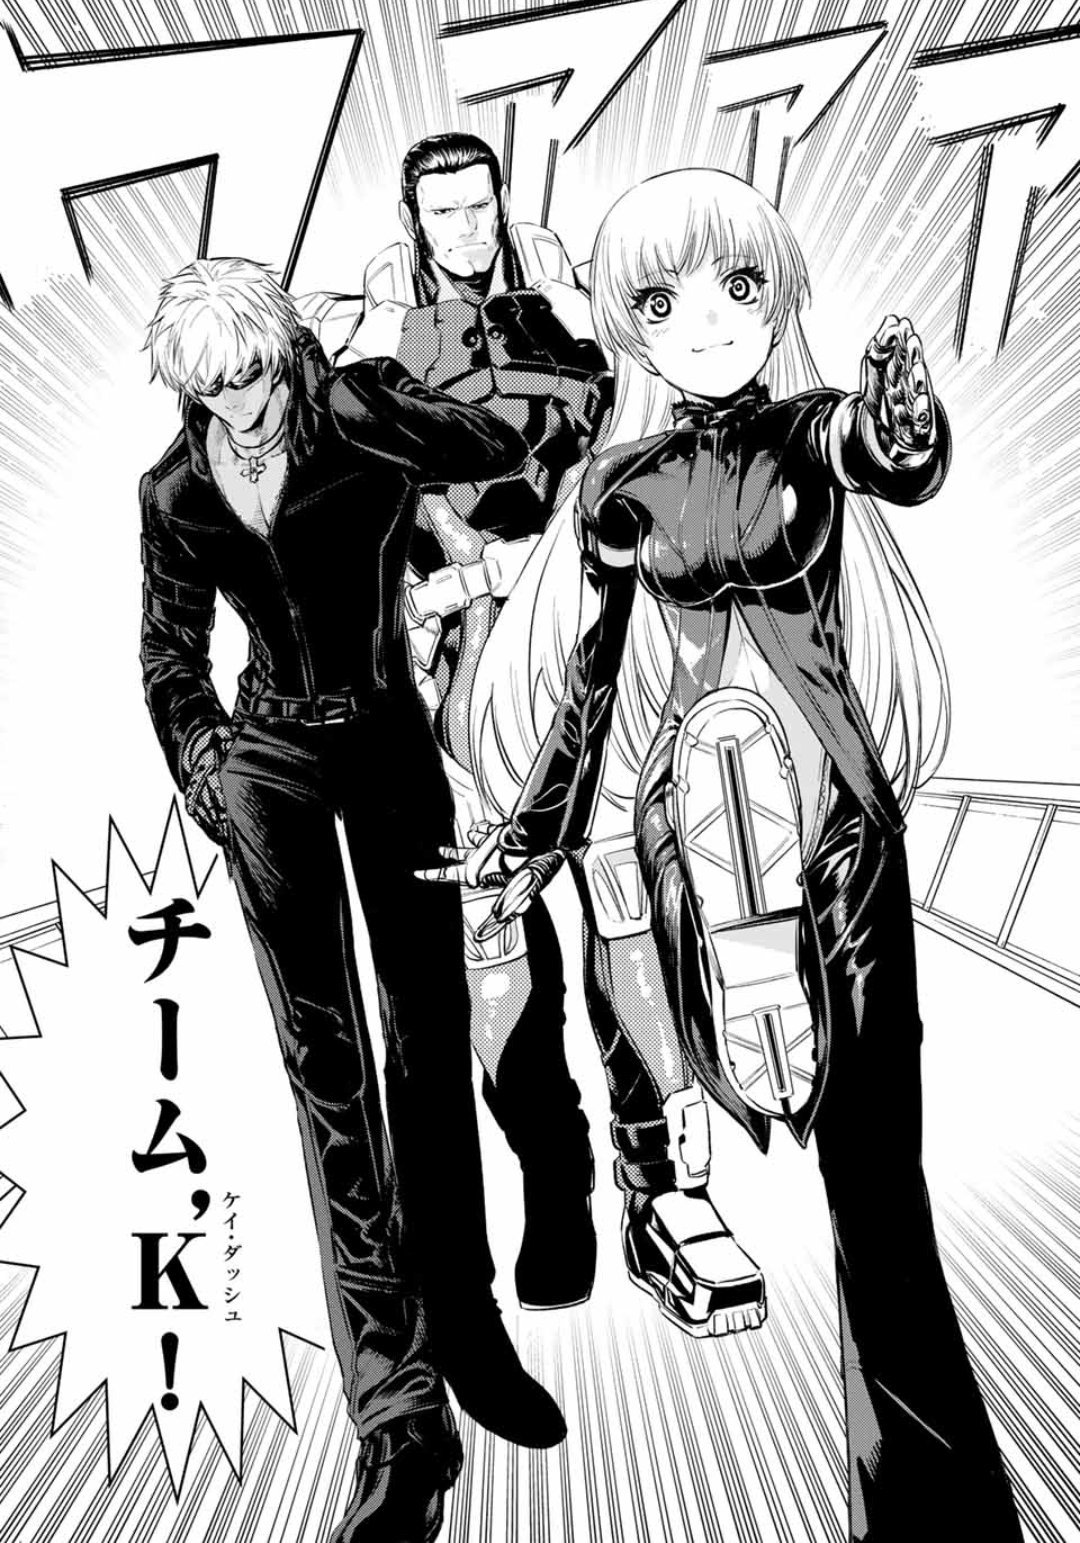 Preview the First Two Chapters of the KOF XIV Manga: "The ...